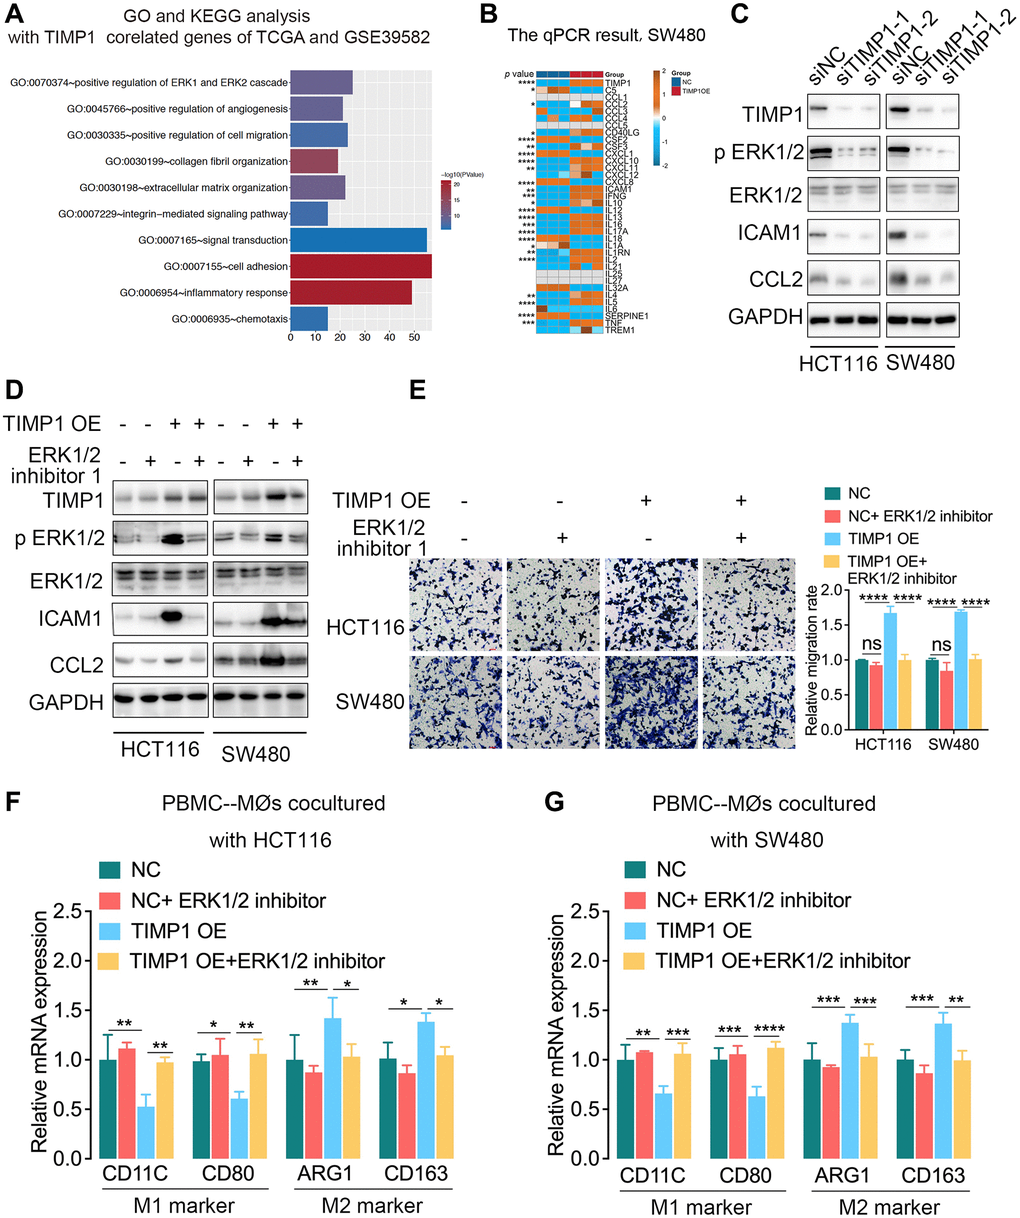 TIMP1 promoted macrophage migration and M2-like polarization by activating the ERK1/2 pathway in CRC. (A) GO analysis and KEGG pathway analysis of overlapping TIMP1-correlated genes in the TCGA and GSE39582 datasets. (B) The PCR results of common cytokines were confirmed in SW480 cells with control and TIMP1 overexpression. (C) Western blot analyses of the indicated proteins in HCT116 and SW480 cells transfected with TIMP1 small interfering or control vector. (D) Western blot analyses of the indicated proteins in HCT116 and SW480 cells transfected with TIMP1 overexpression or control vector and treated with ERK1/2 inhibitor 1 (10 nM). (E) The migration ability of macrophages was confirmed with Transwell assays in the TIMP1 overexpression group treated with ERK1/2 inhibitor 1 (10 nM). (F, G) PCR results of detecting the polarization of macrophages under different cocultures with CRC cells treated with ERK1/2 inhibitor 1 (10 nM). (Data are presented as the means ± standard deviations; *indicates P **indicates P ***indicates P ****indicates P 